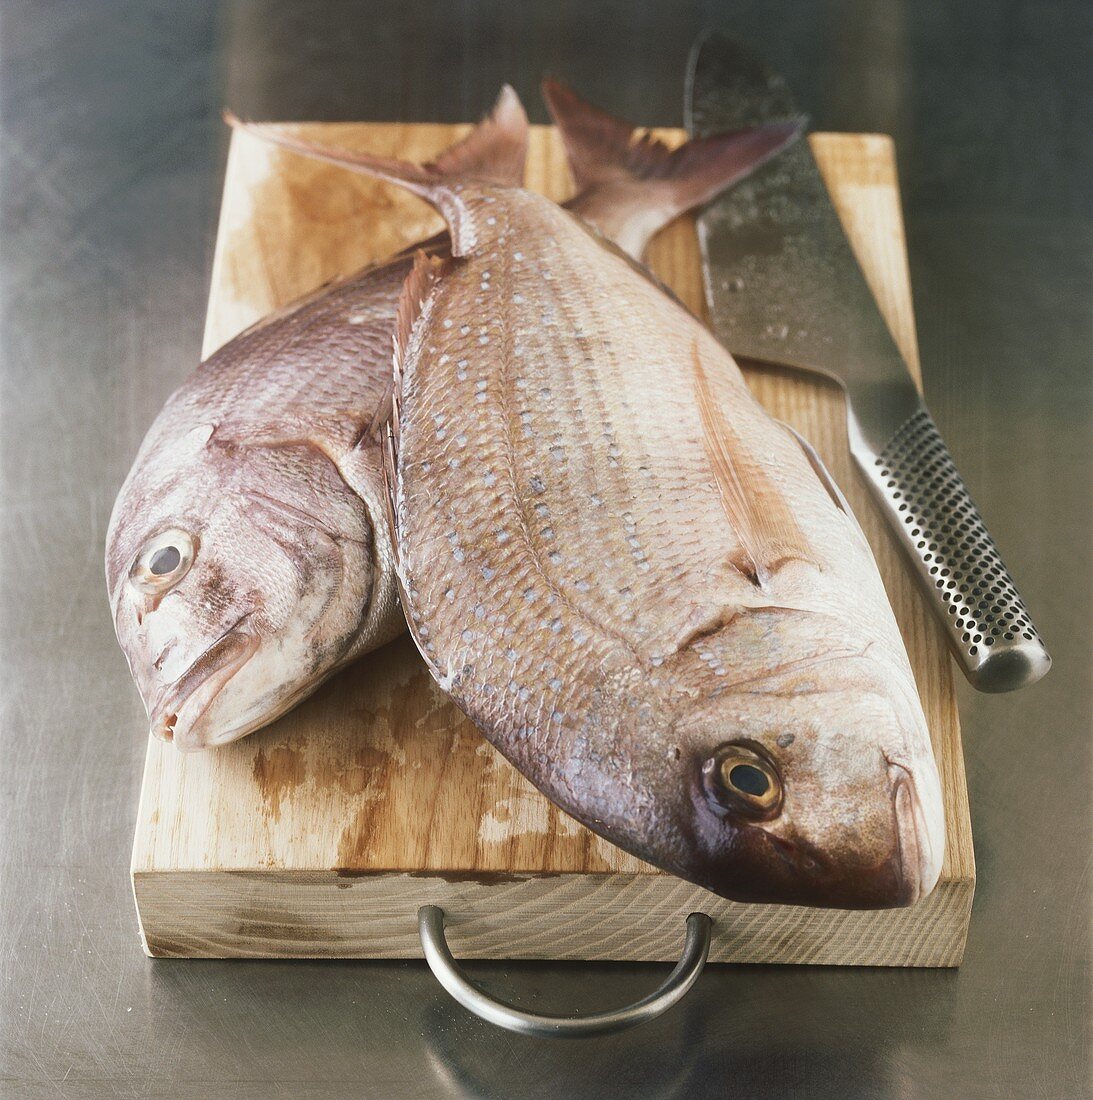 Two sea bream on chopping board with knife